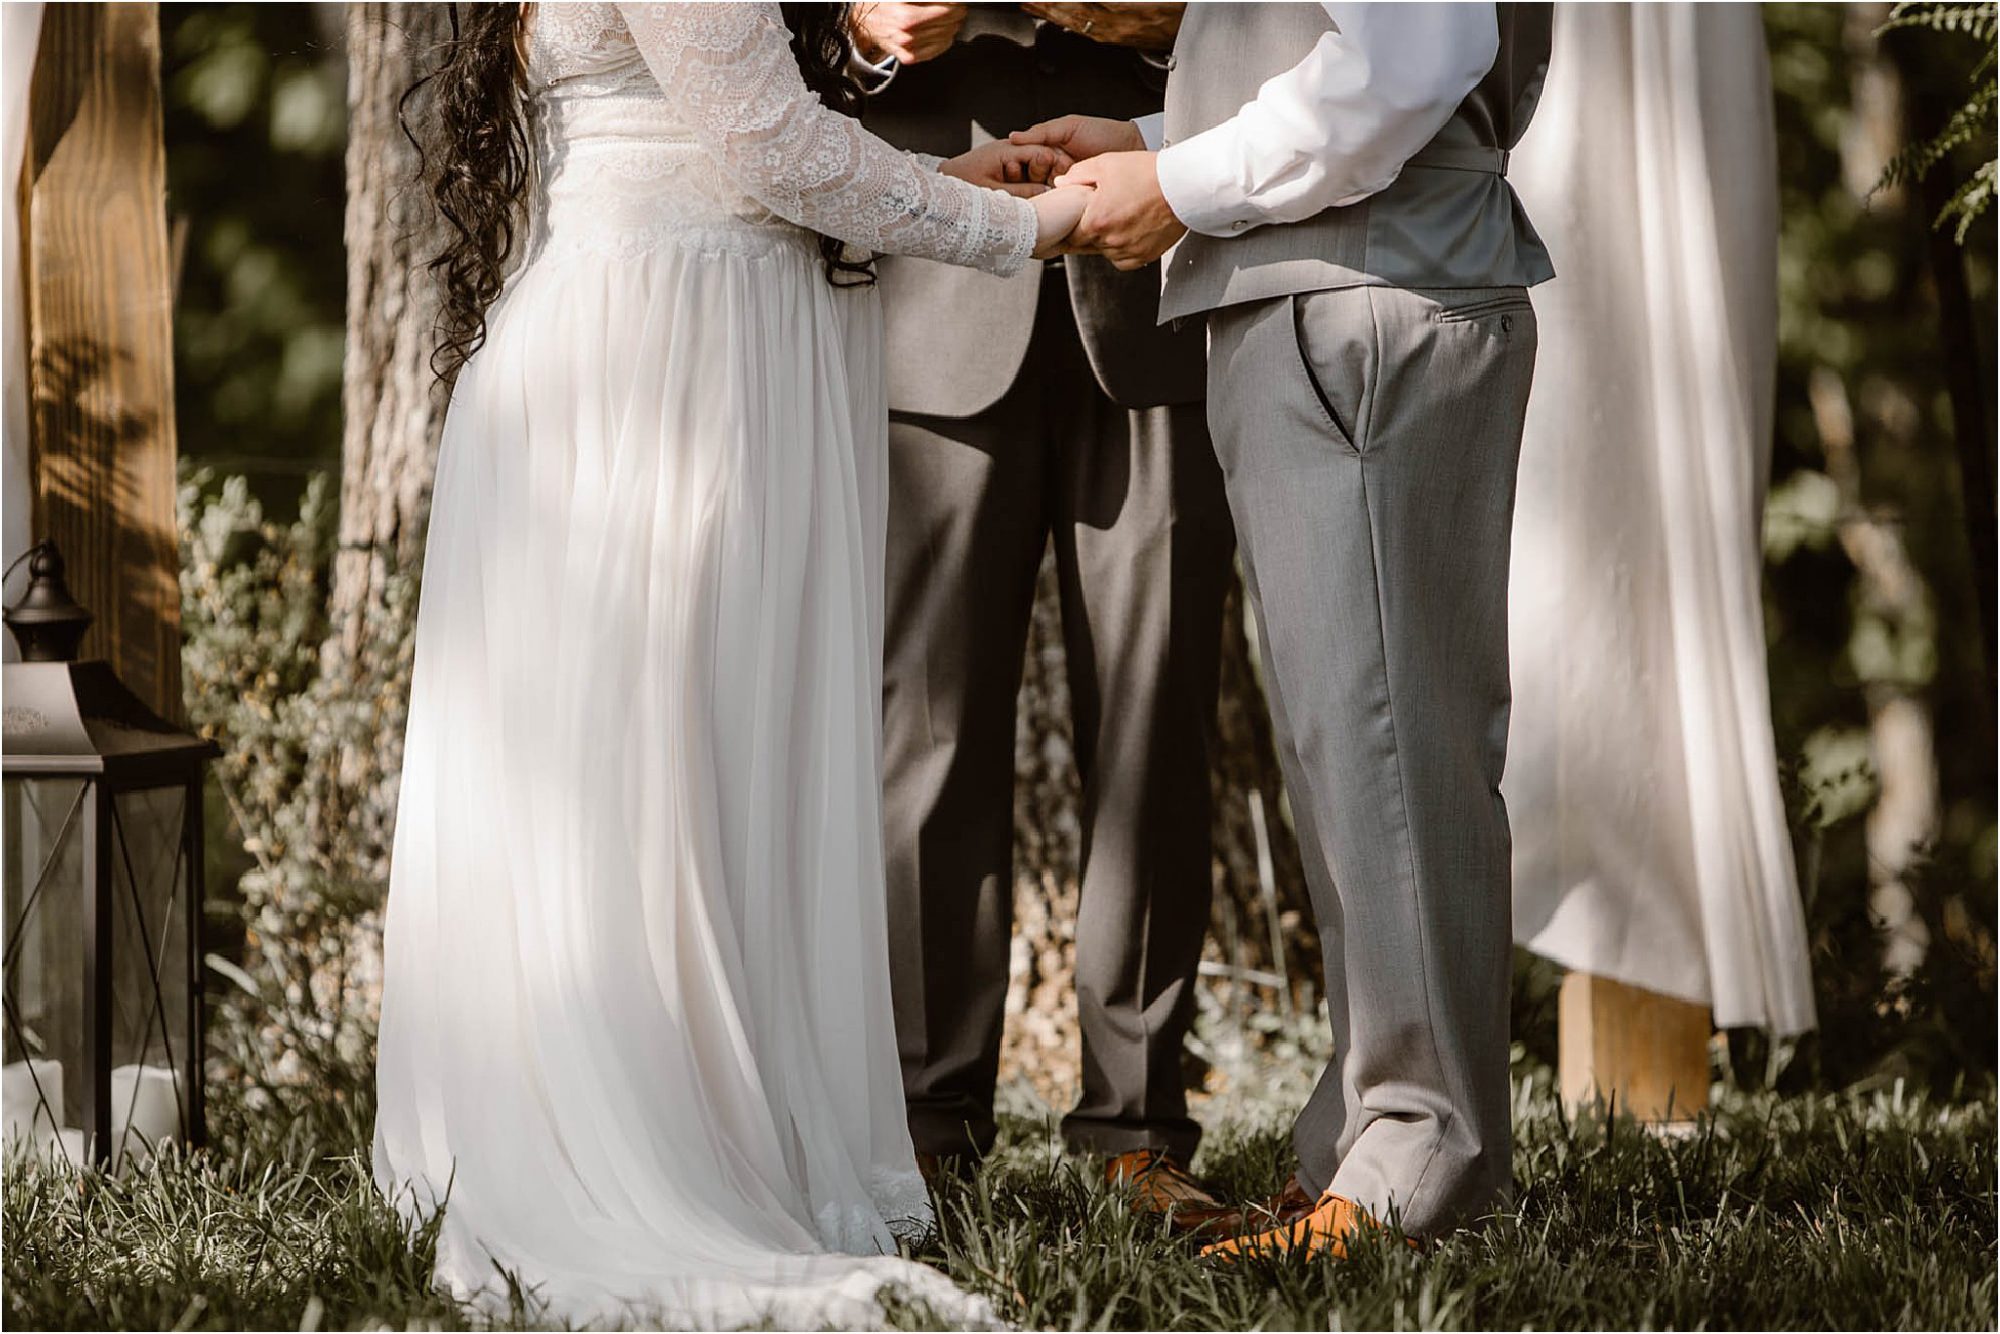 bride and groom holding hands at wedding ceremony